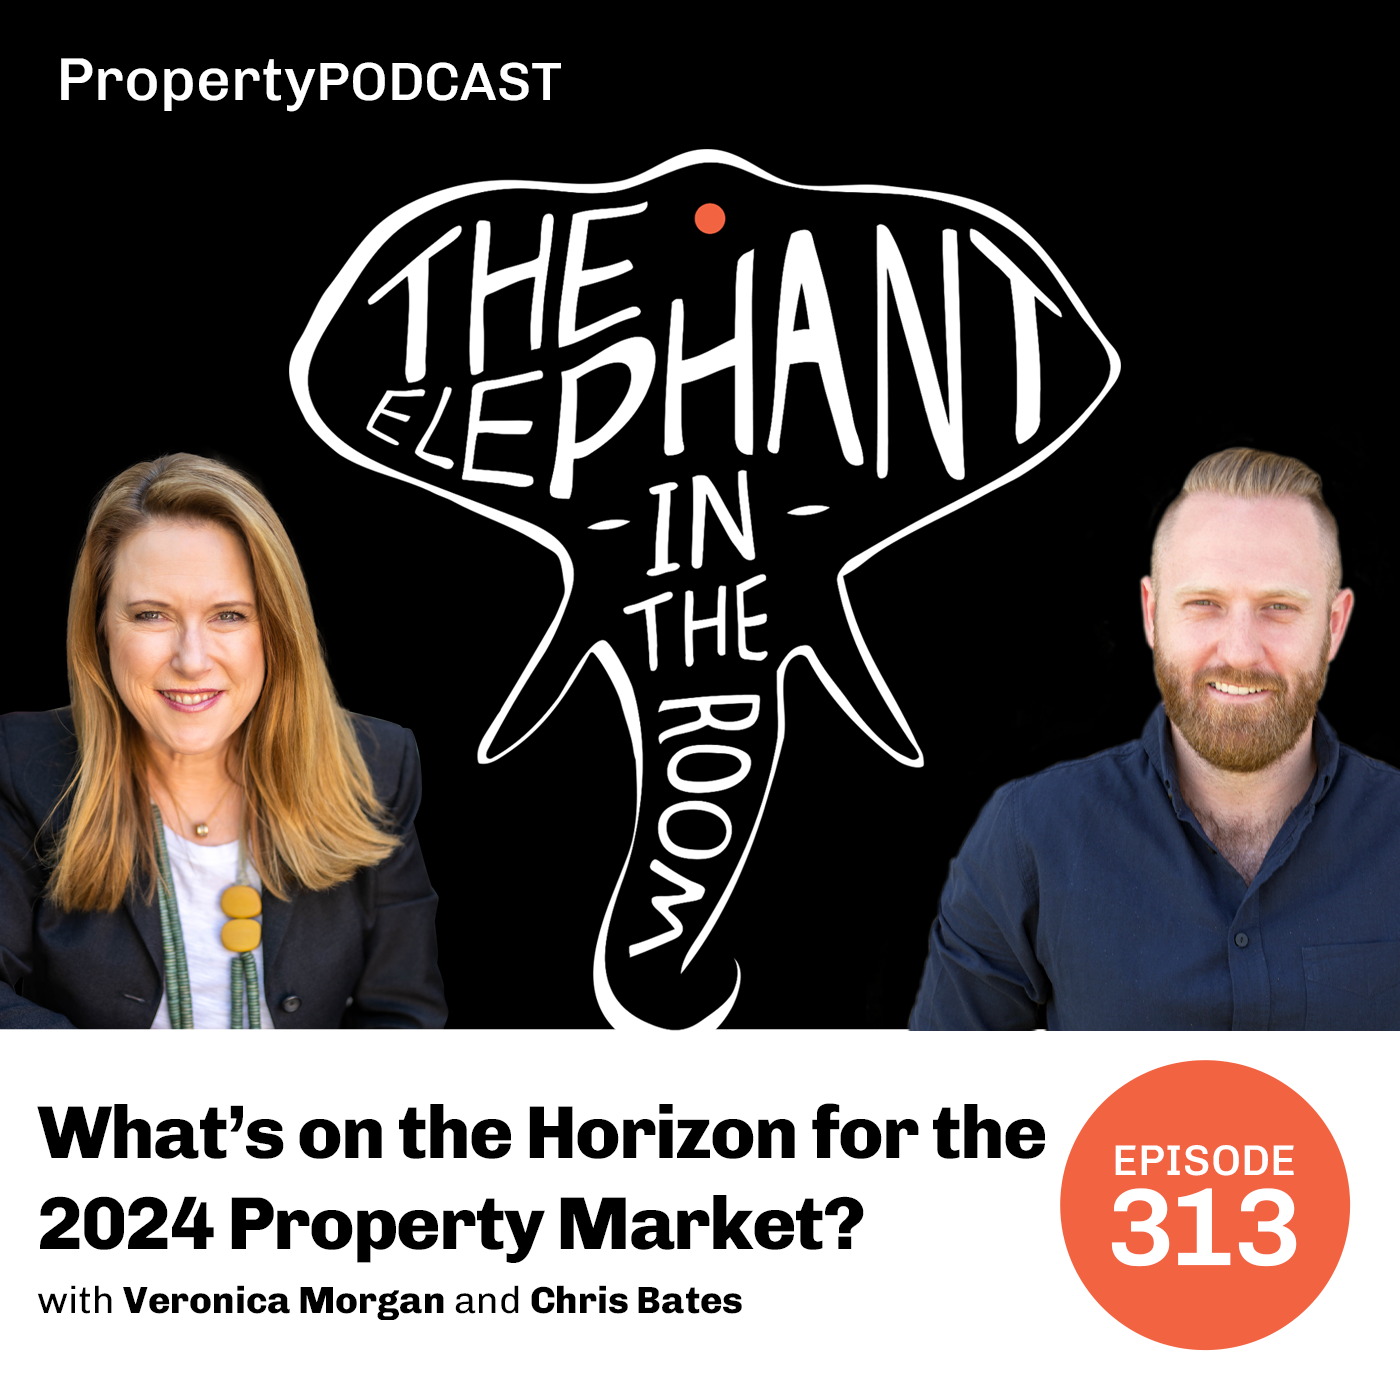 What’s on the Horizon for the 2024 Property Market?